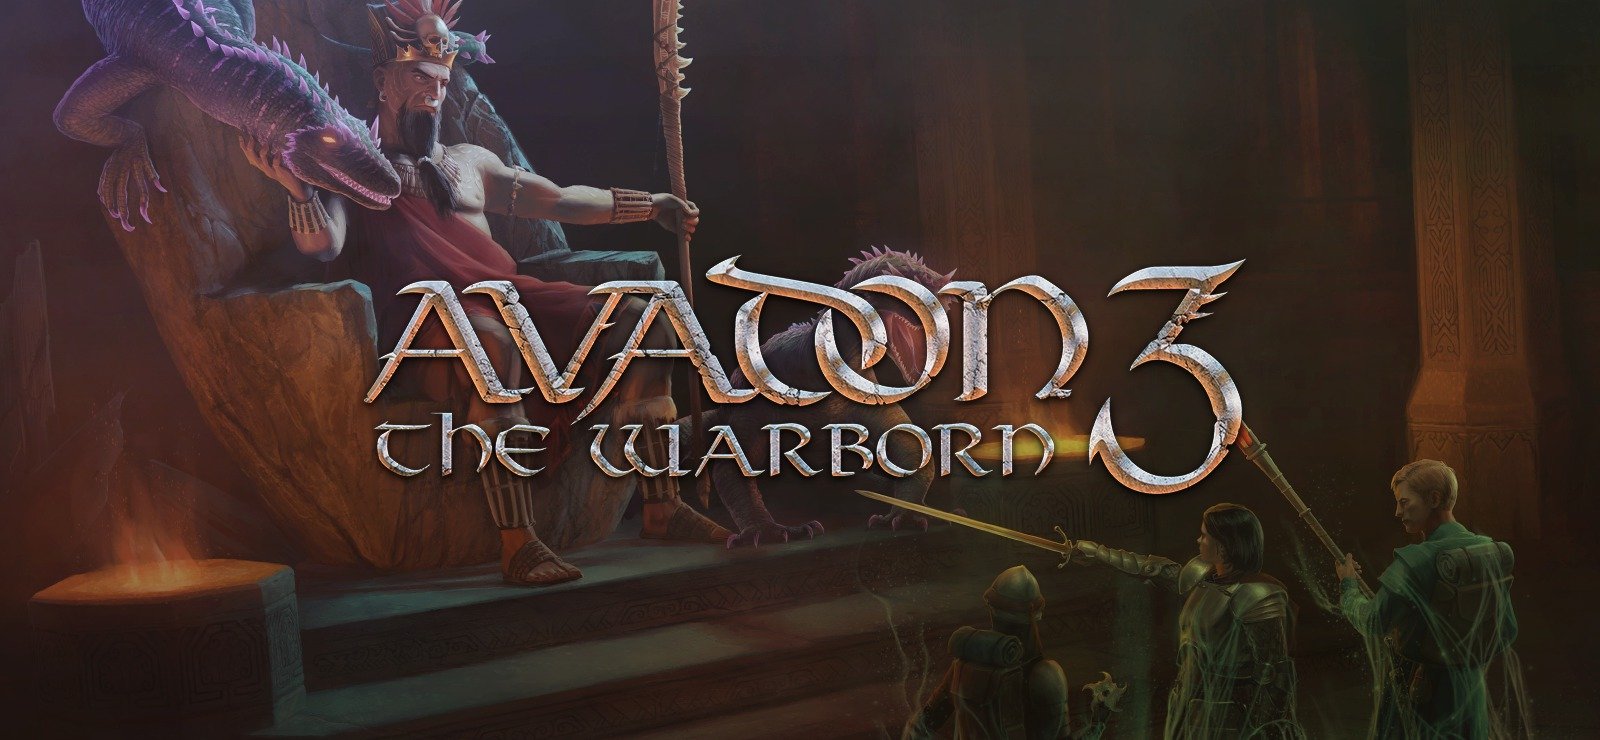 Image of Avadon 3: The Warborn